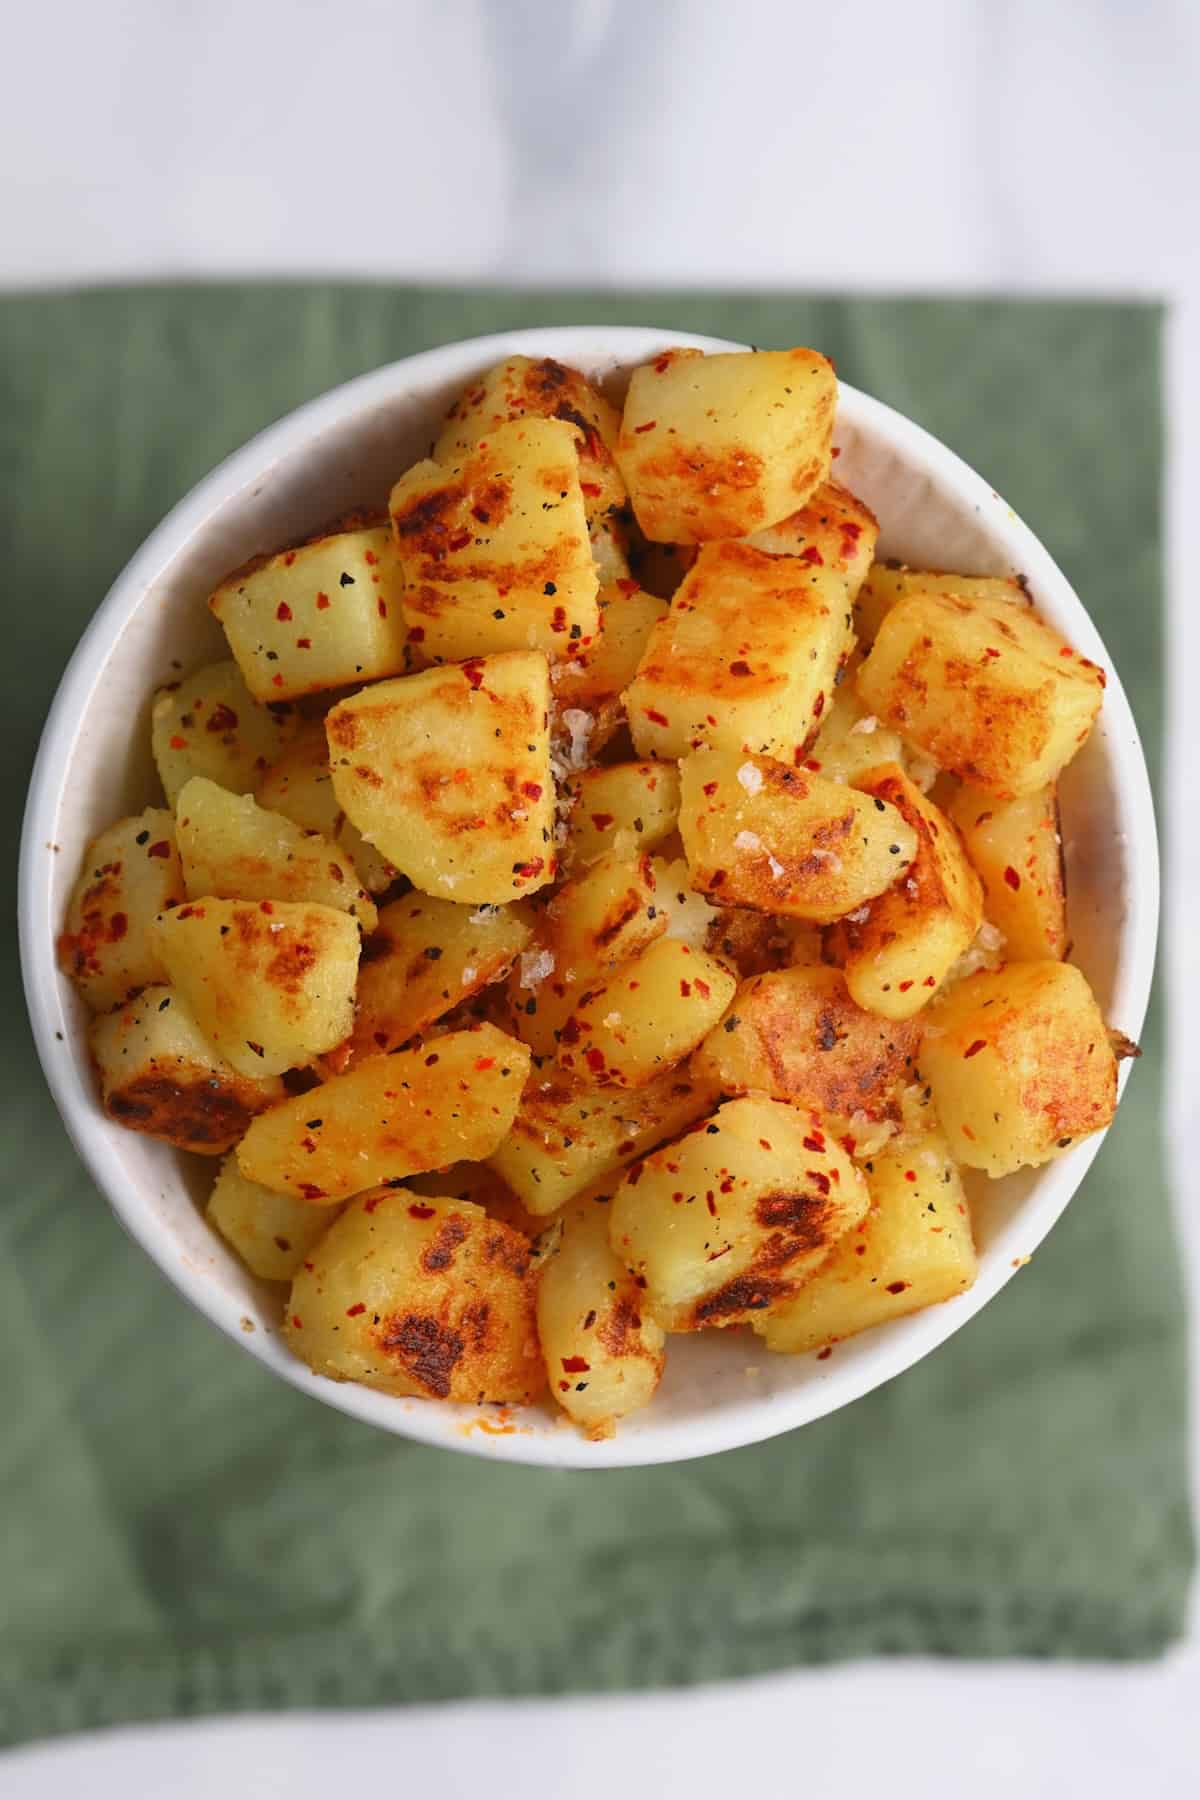 Pan fried potoatoes in a bowl